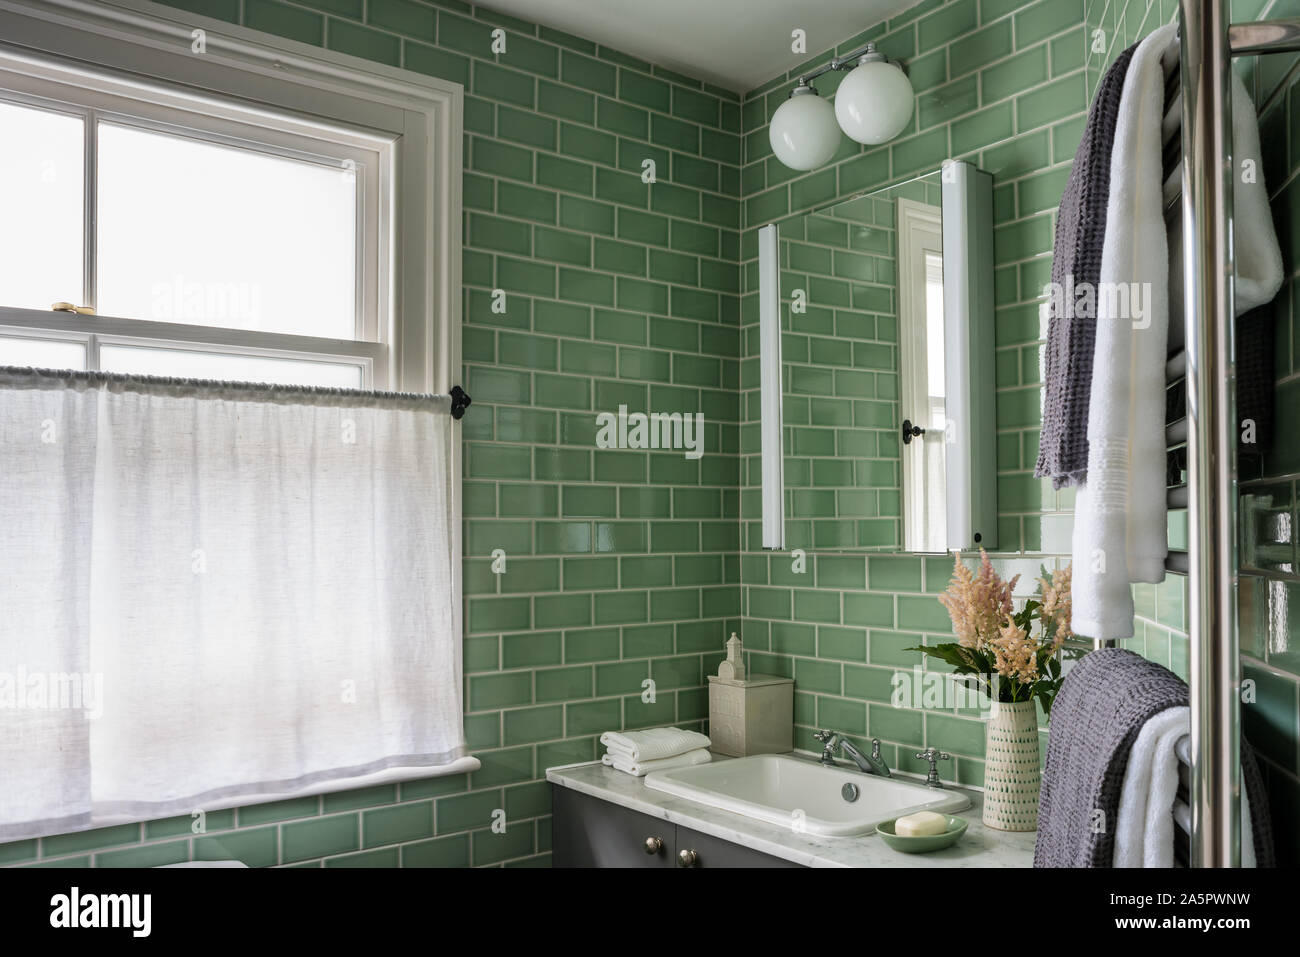 Greeen tiled bathroom with wall mounted cabinet Stock Photo